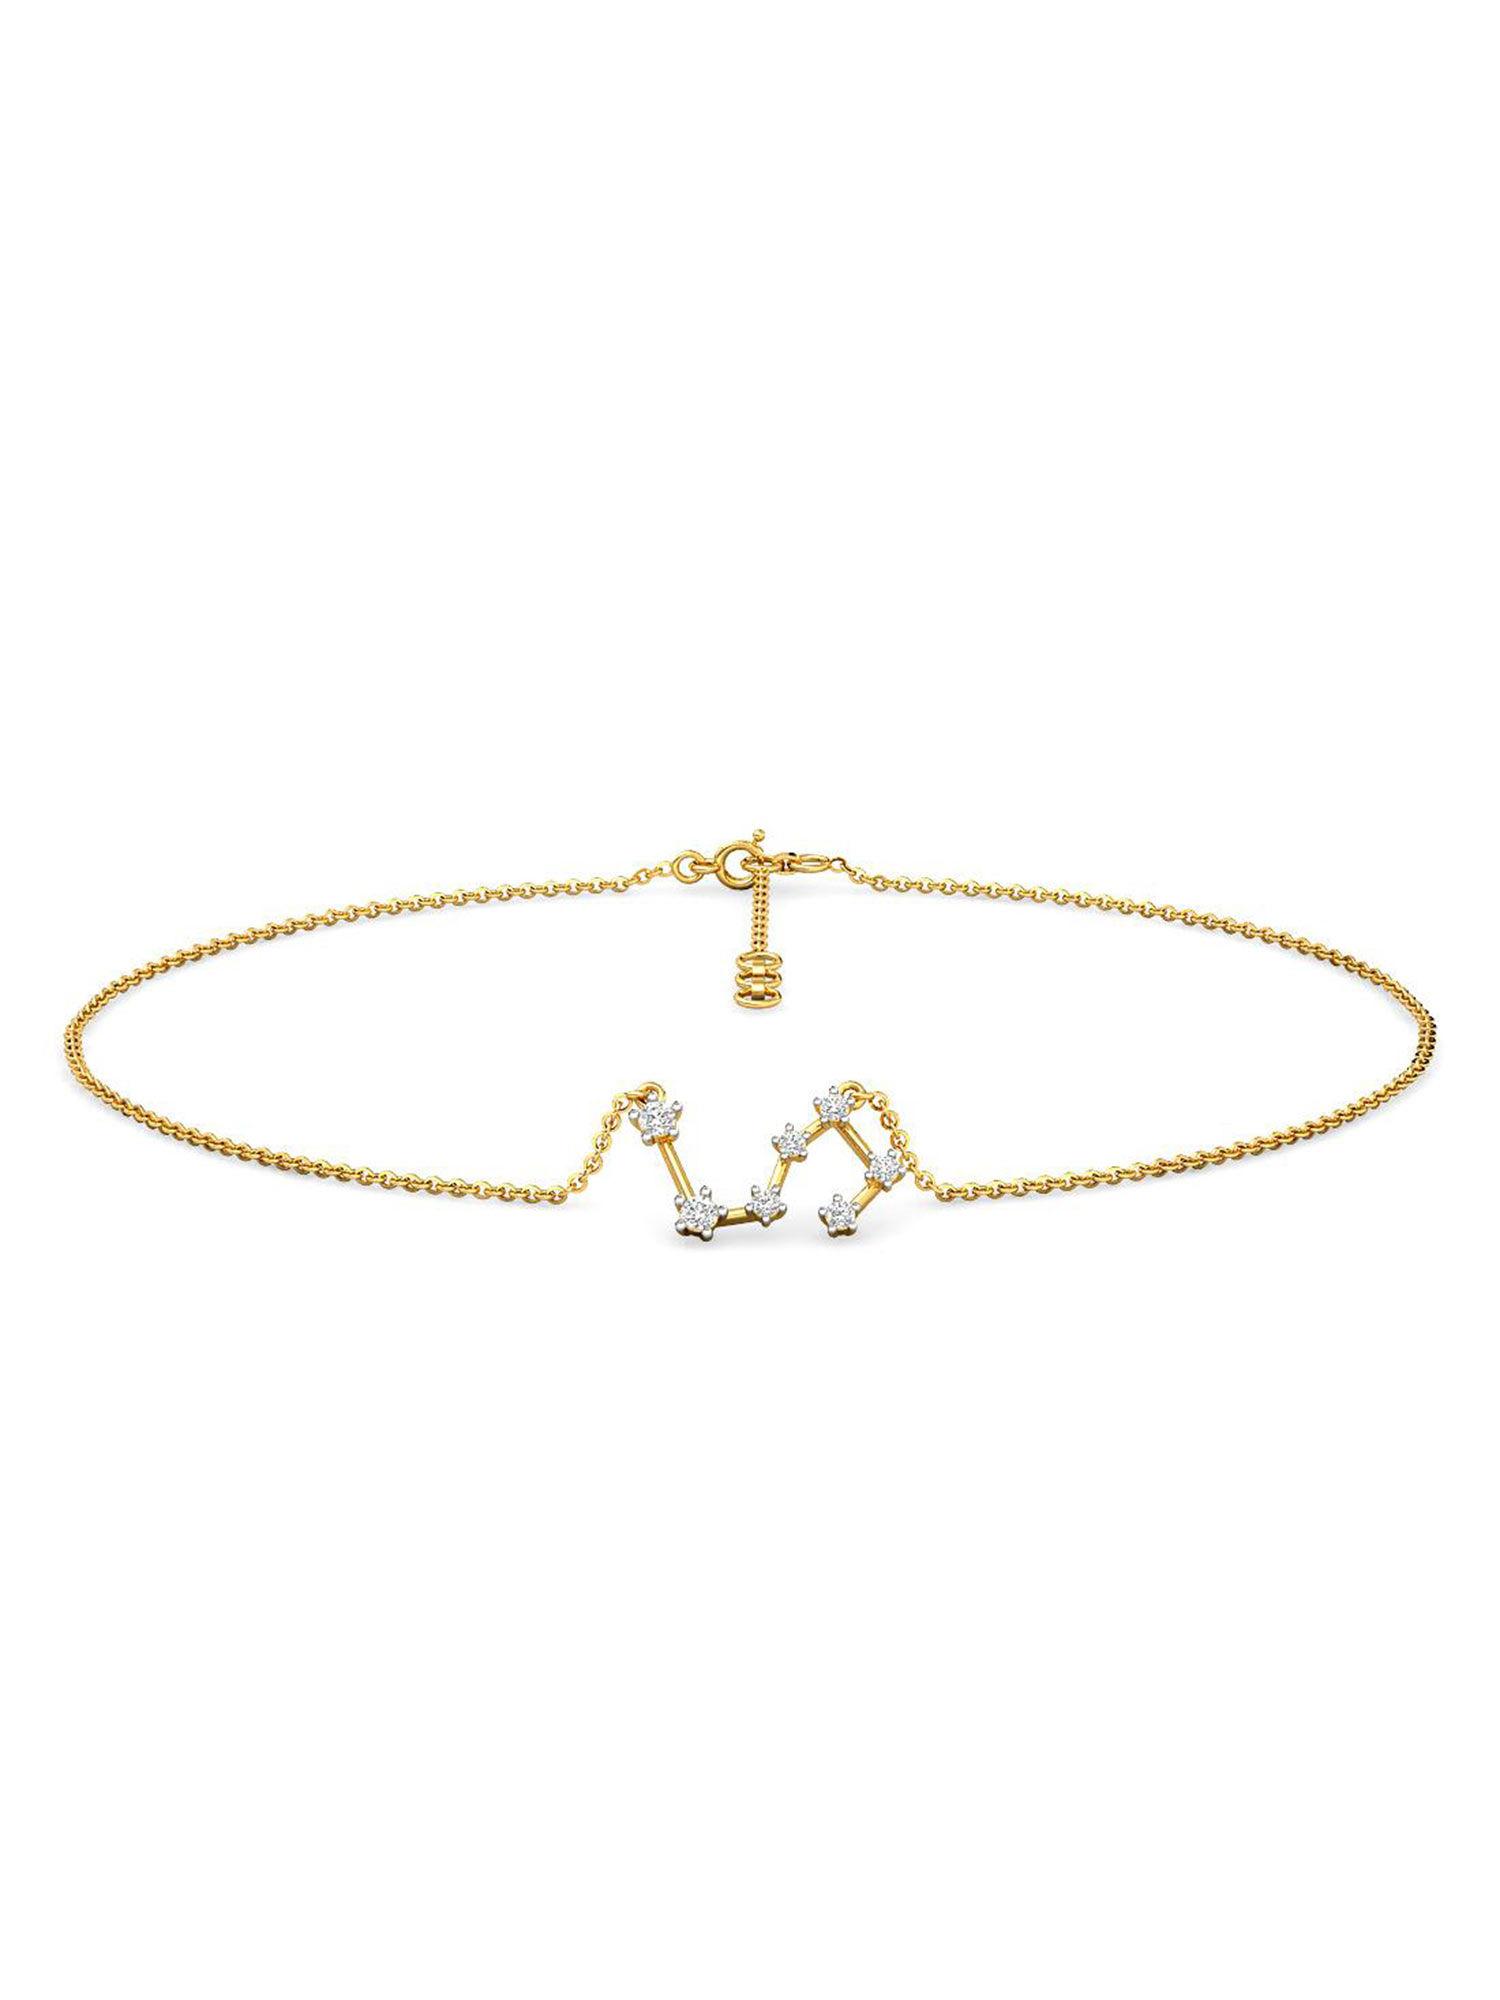 leo 18k yellow gold and diamond anklet for women